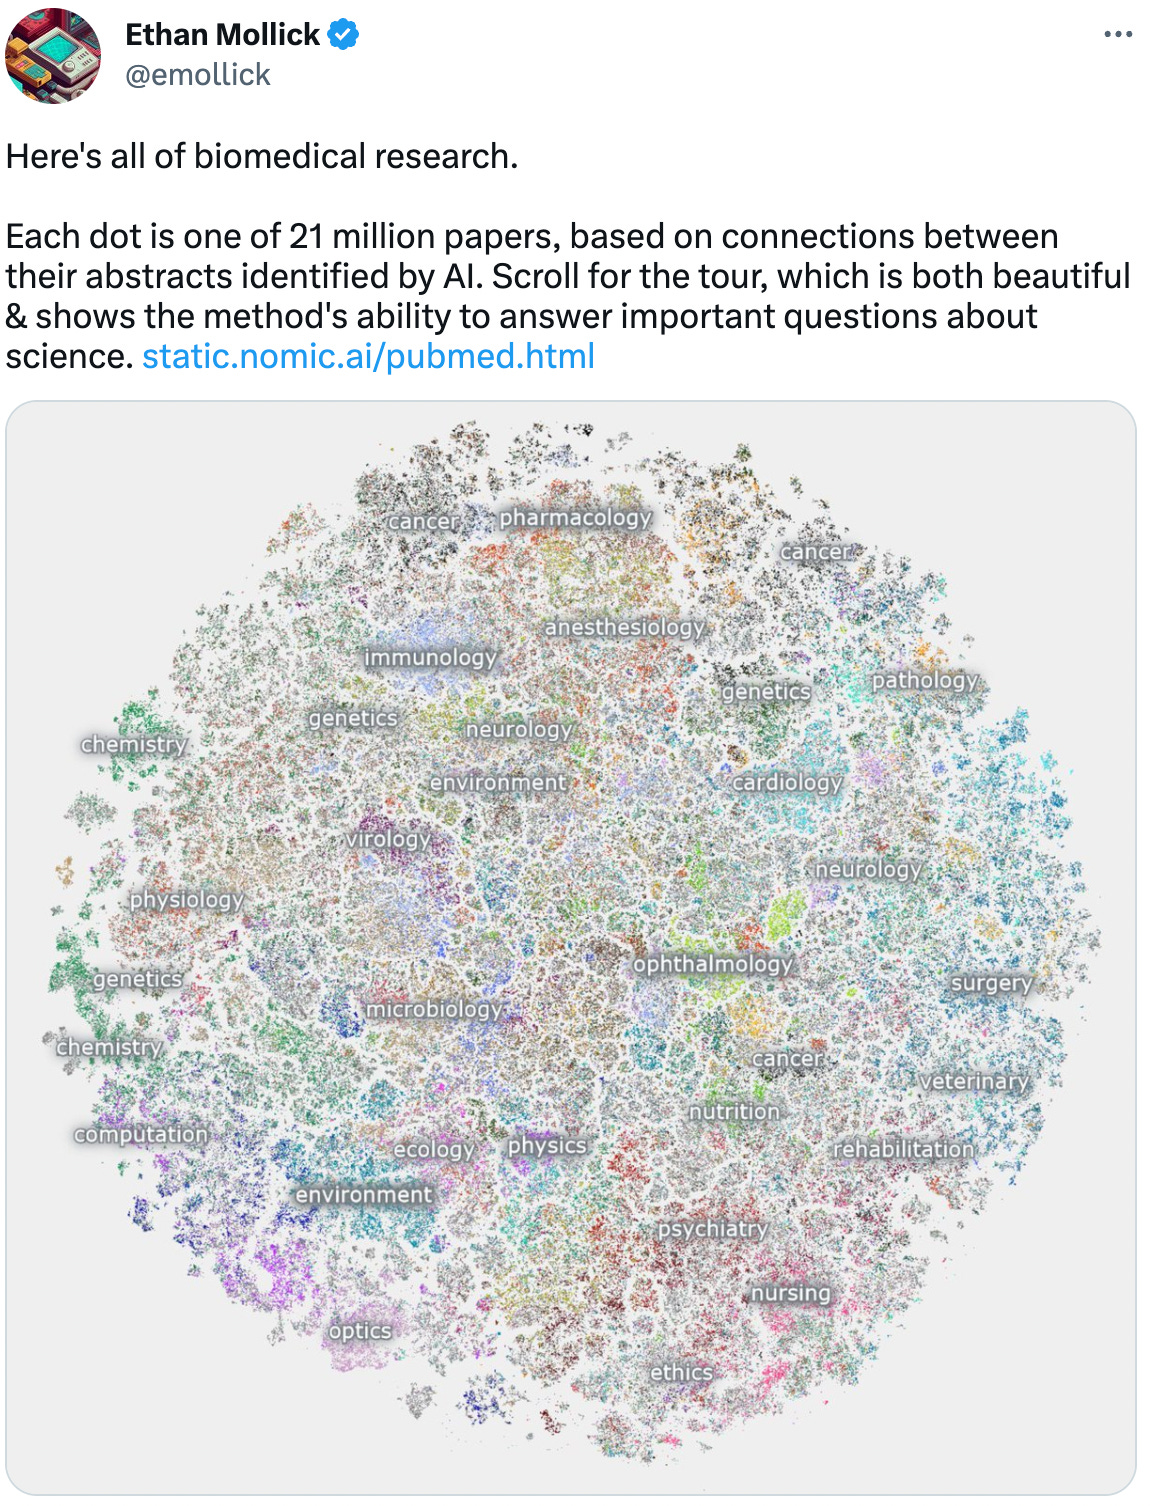  See new Tweets Conversation Ethan Mollick @emollick Here's all of biomedical research.   Each dot is one of 21 million papers, based on connections between their abstracts identified by AI. Scroll for the tour, which is both beautiful & shows the method's ability to answer important questions about science. https://static.nomic.ai/pubmed.html